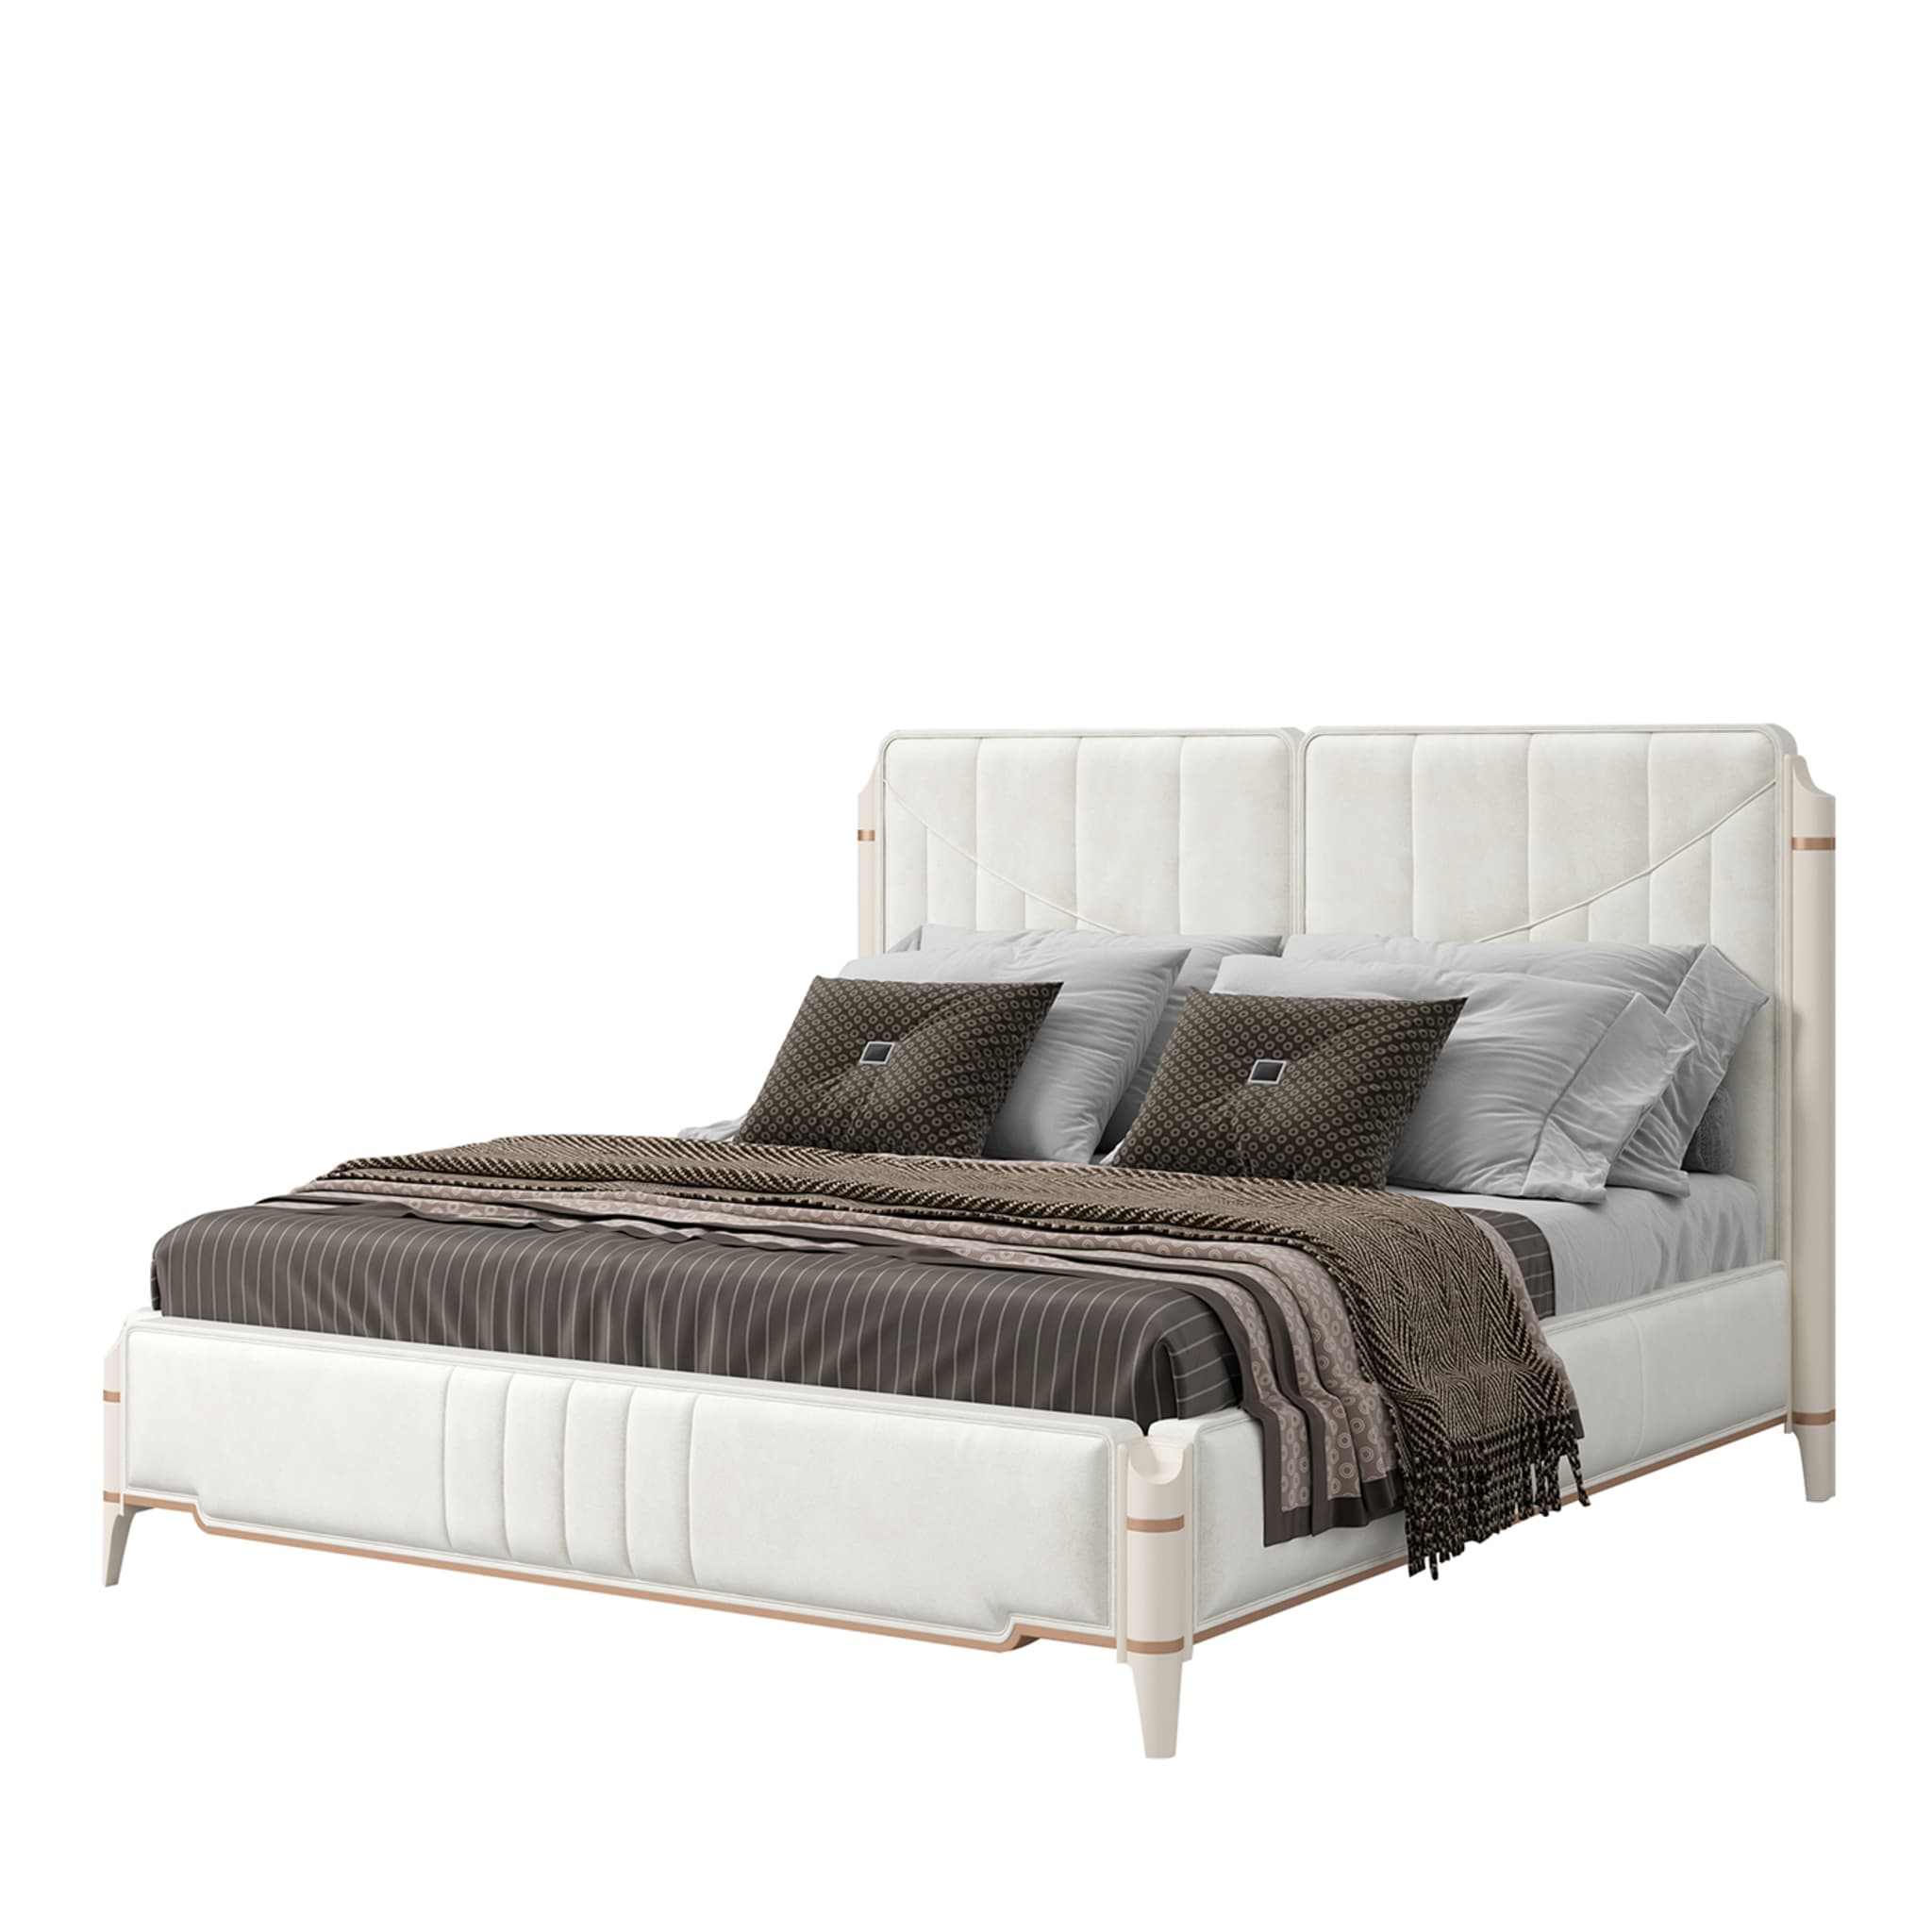 James Beige Double Bed - Main view